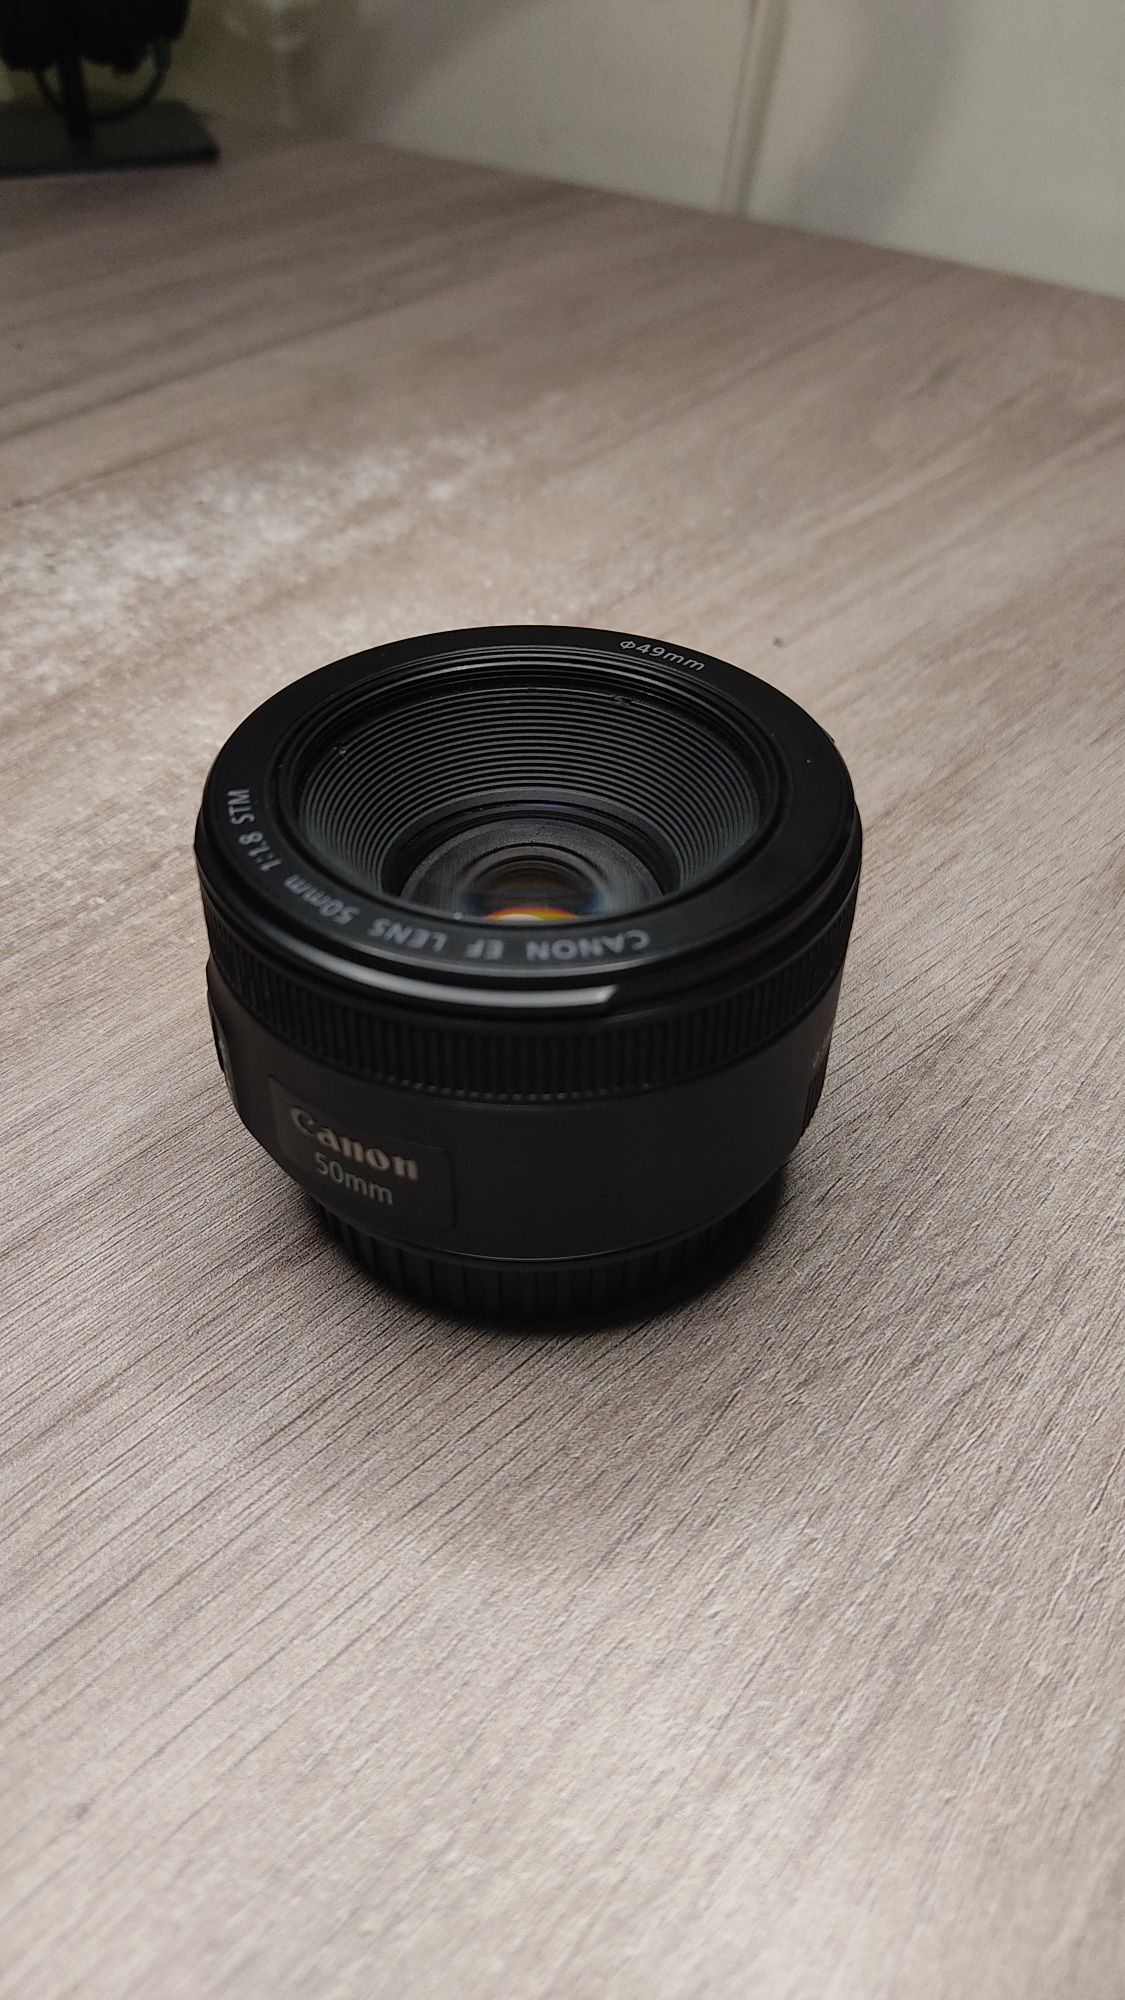 Canon 50mm F1.8 II STM